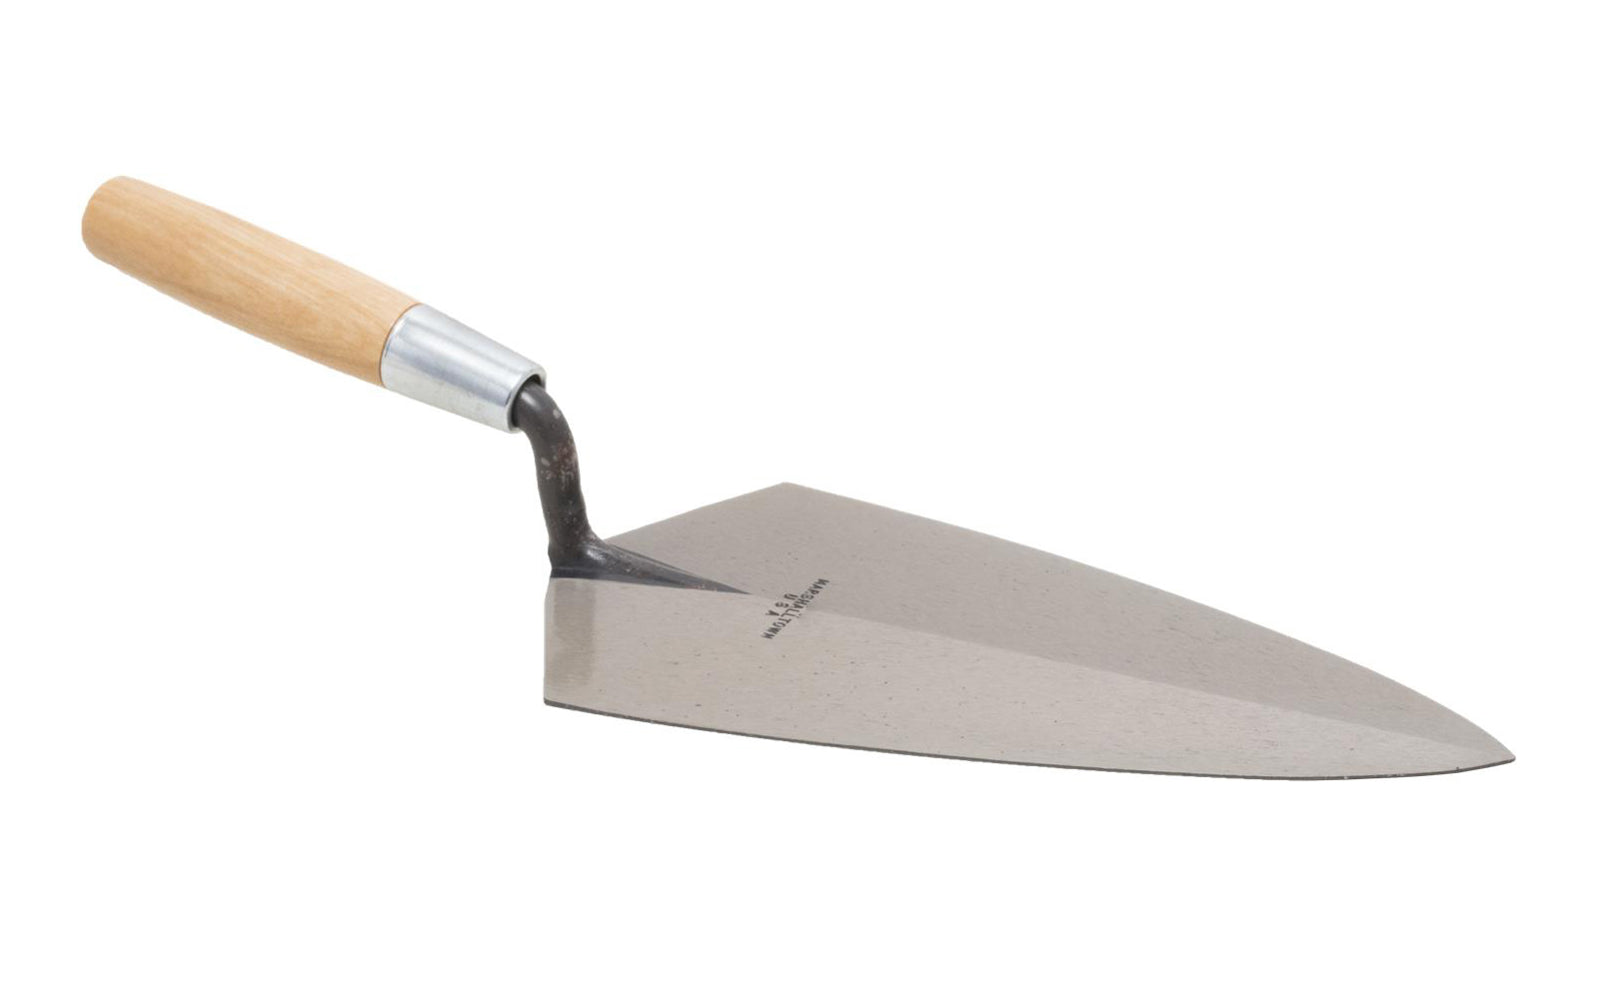 This Marshalltown 10" Brick Trowel "19 10" Style is essential for all functional or decorative brick, block, & stonework. Marshalltown Model 19 10 "Philadelphia" pattern. Made in USA ~ 035965001069